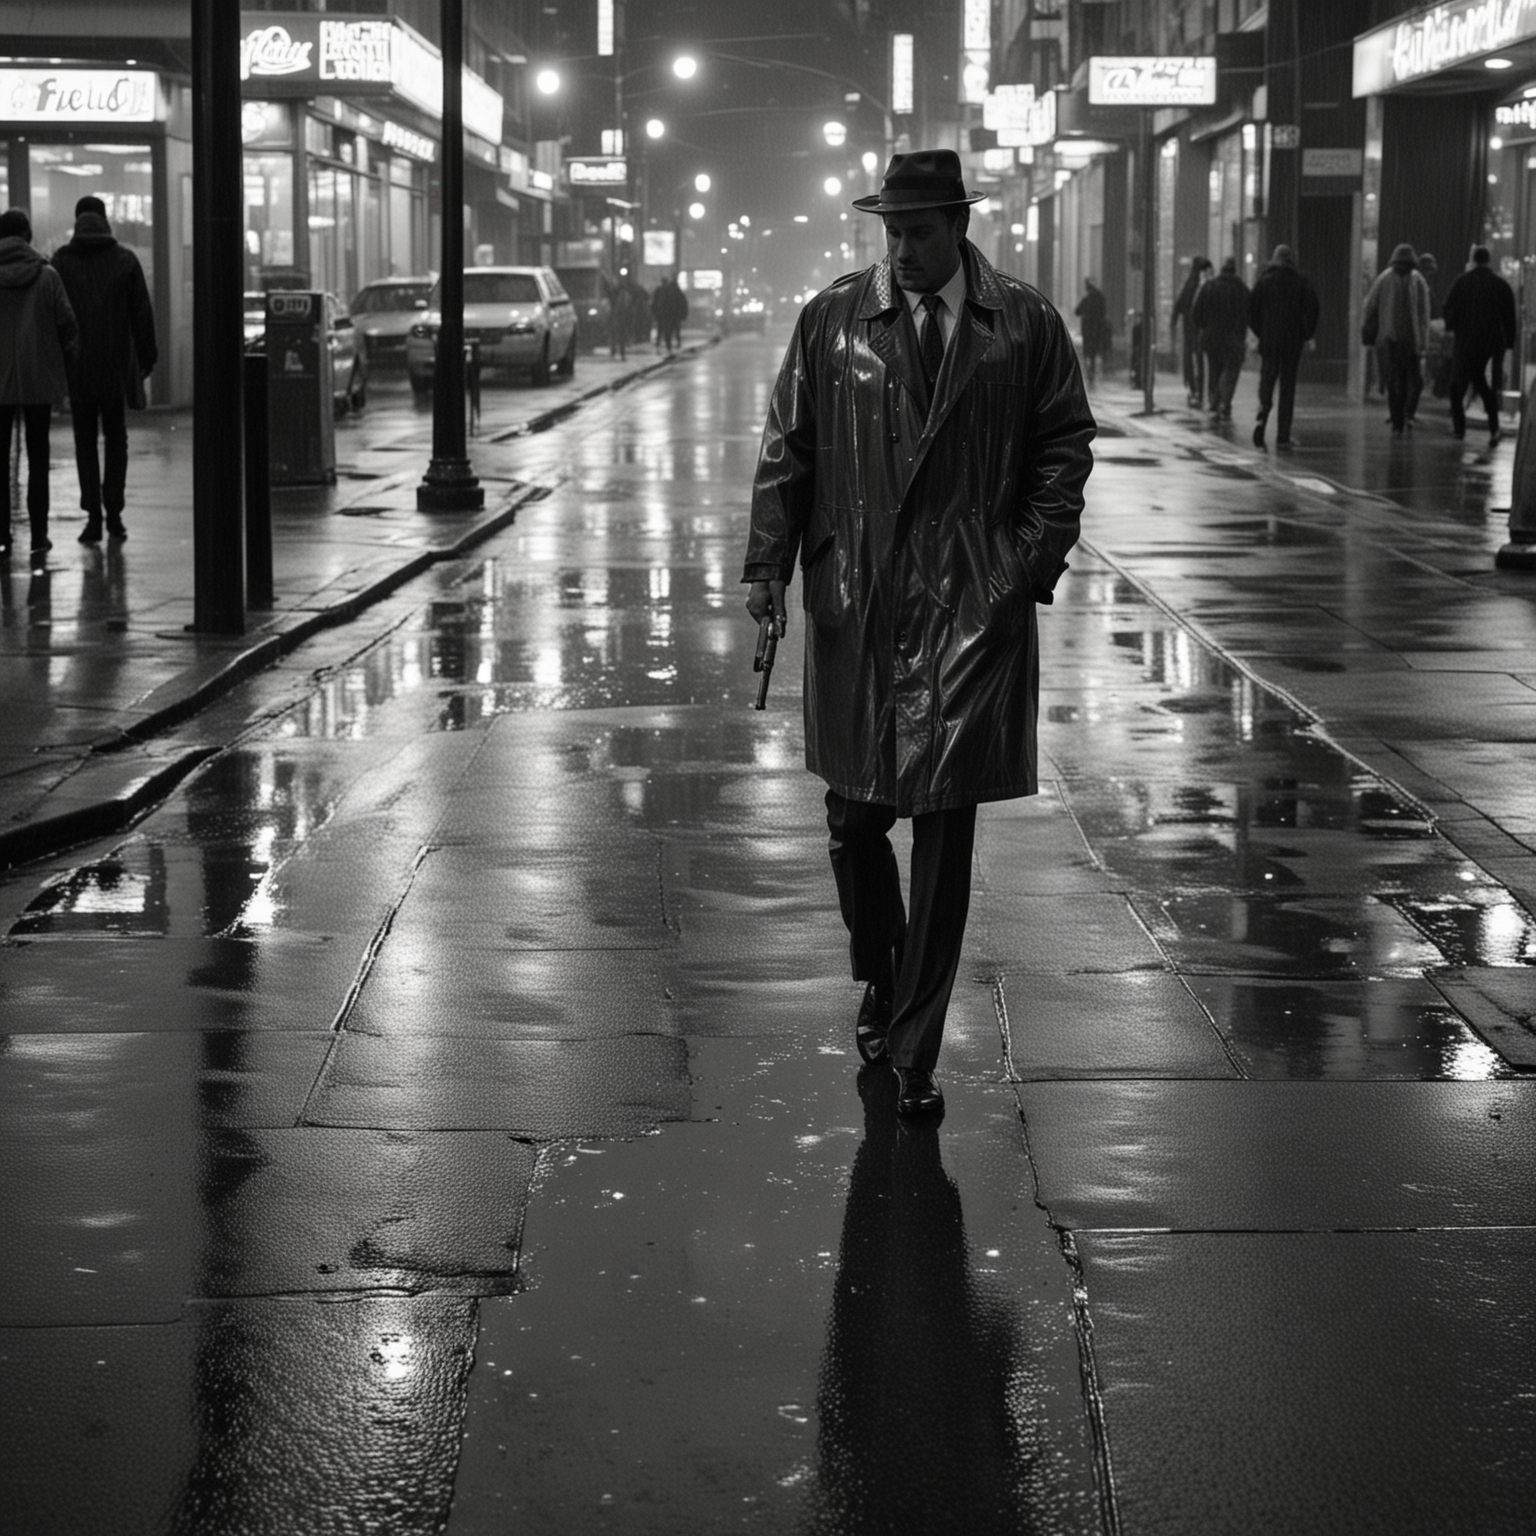 Monochrome Neon Signs, reflected on wet sidewalks and roads in a city's downtown. Man walks along sidewalk wearing a rain coat over a suit, smoking a cigar.